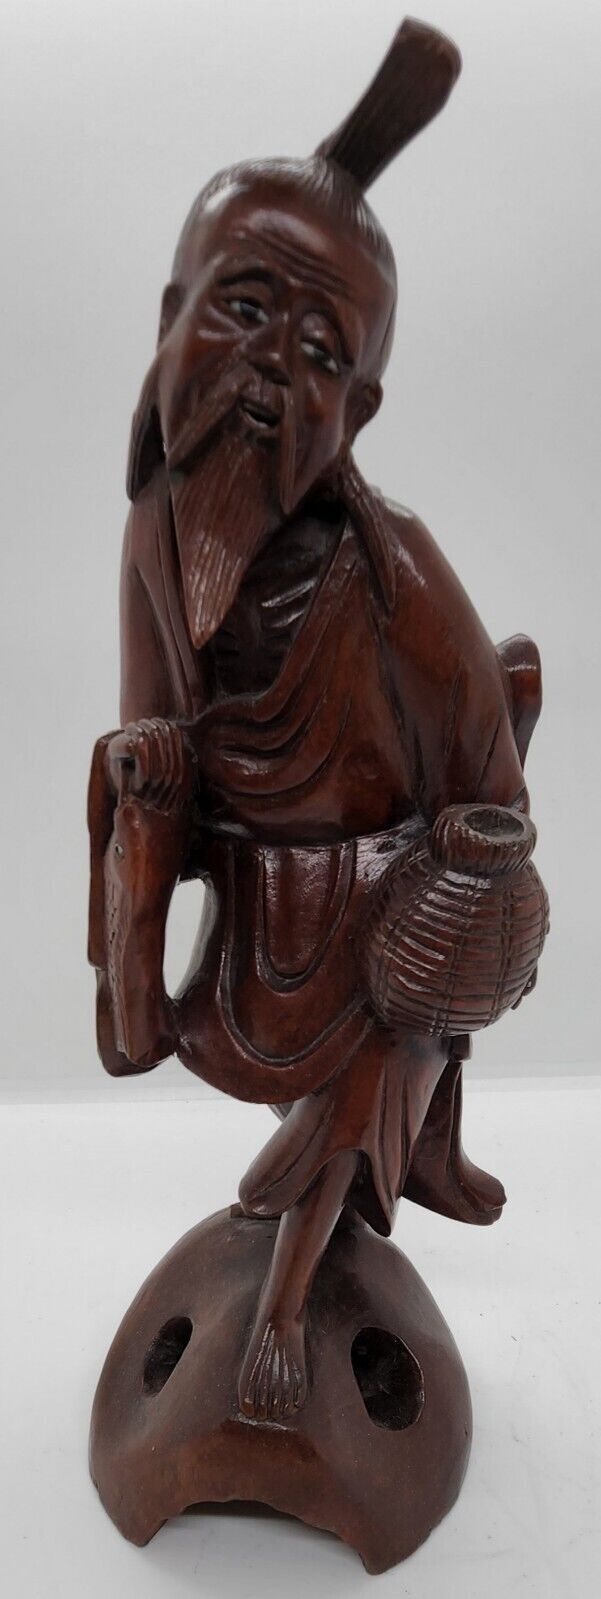 Chinese Wood Hand Carved Fisherman Figurine Fish Old Man Statue Sculpture 10"